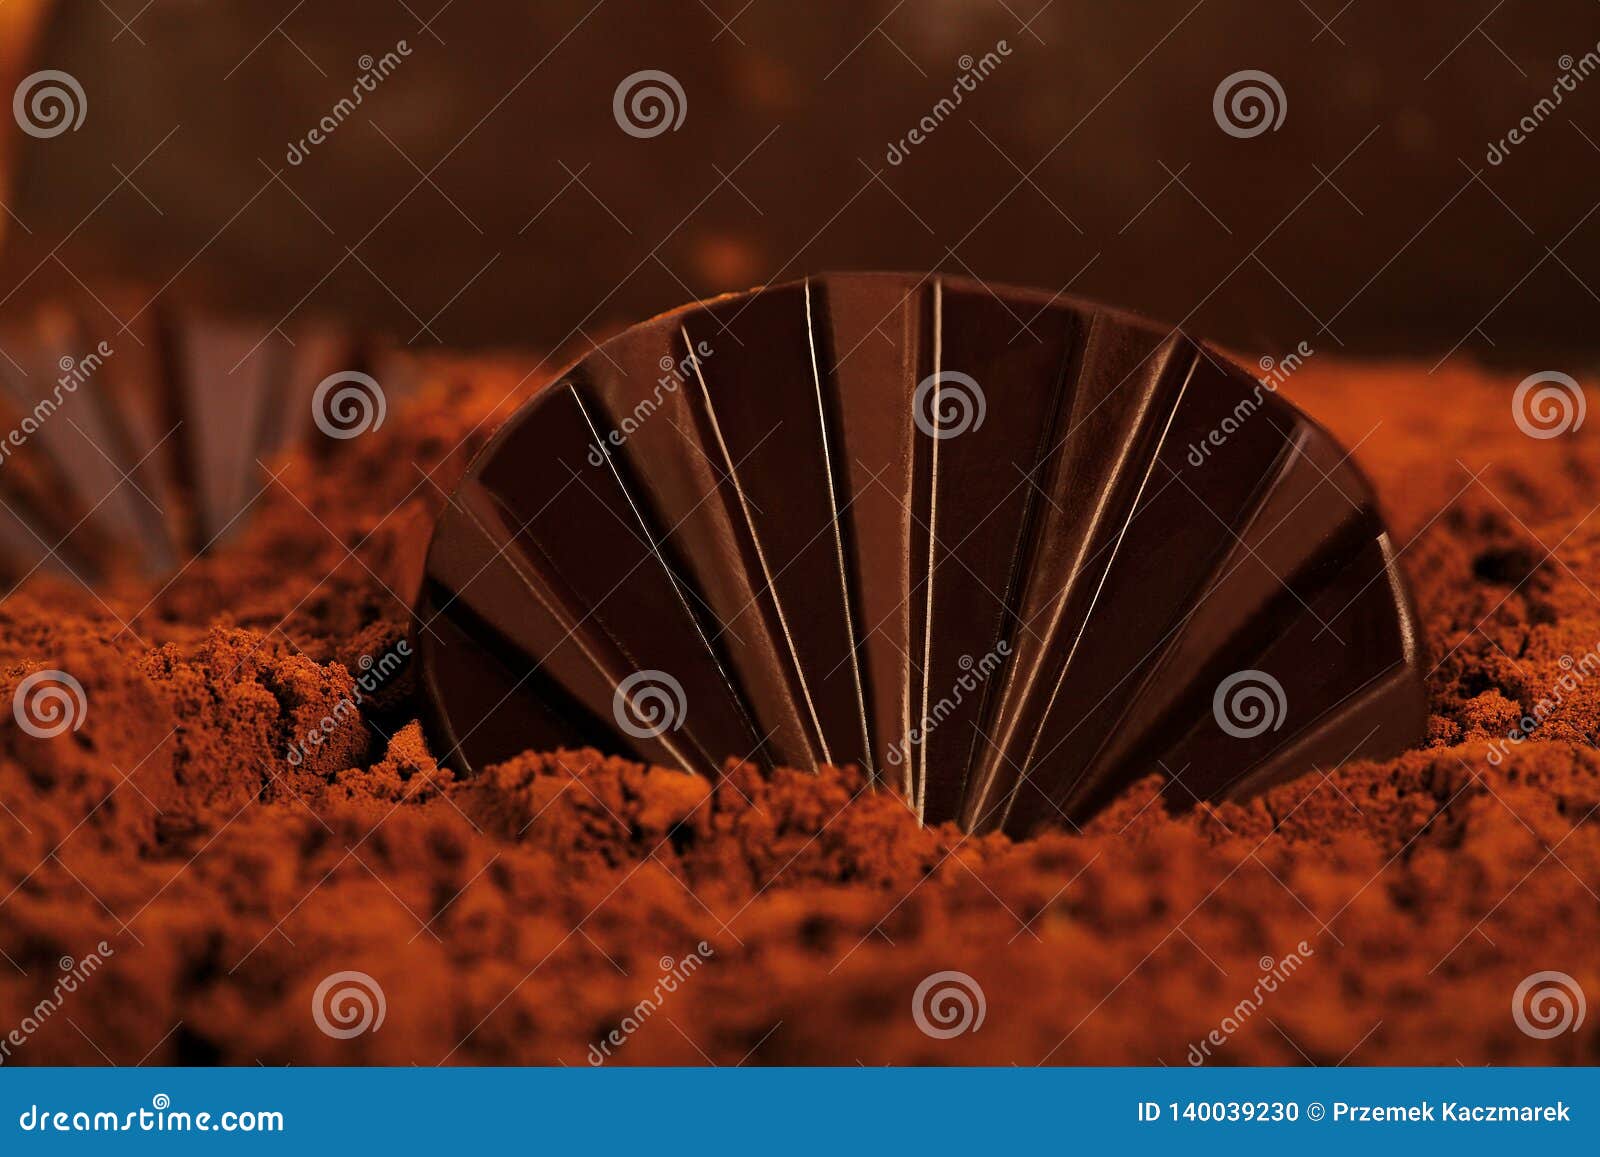 Shell Porn - Chocolate Shell On A Chocolate Beach. Stock Photo - Image of ...